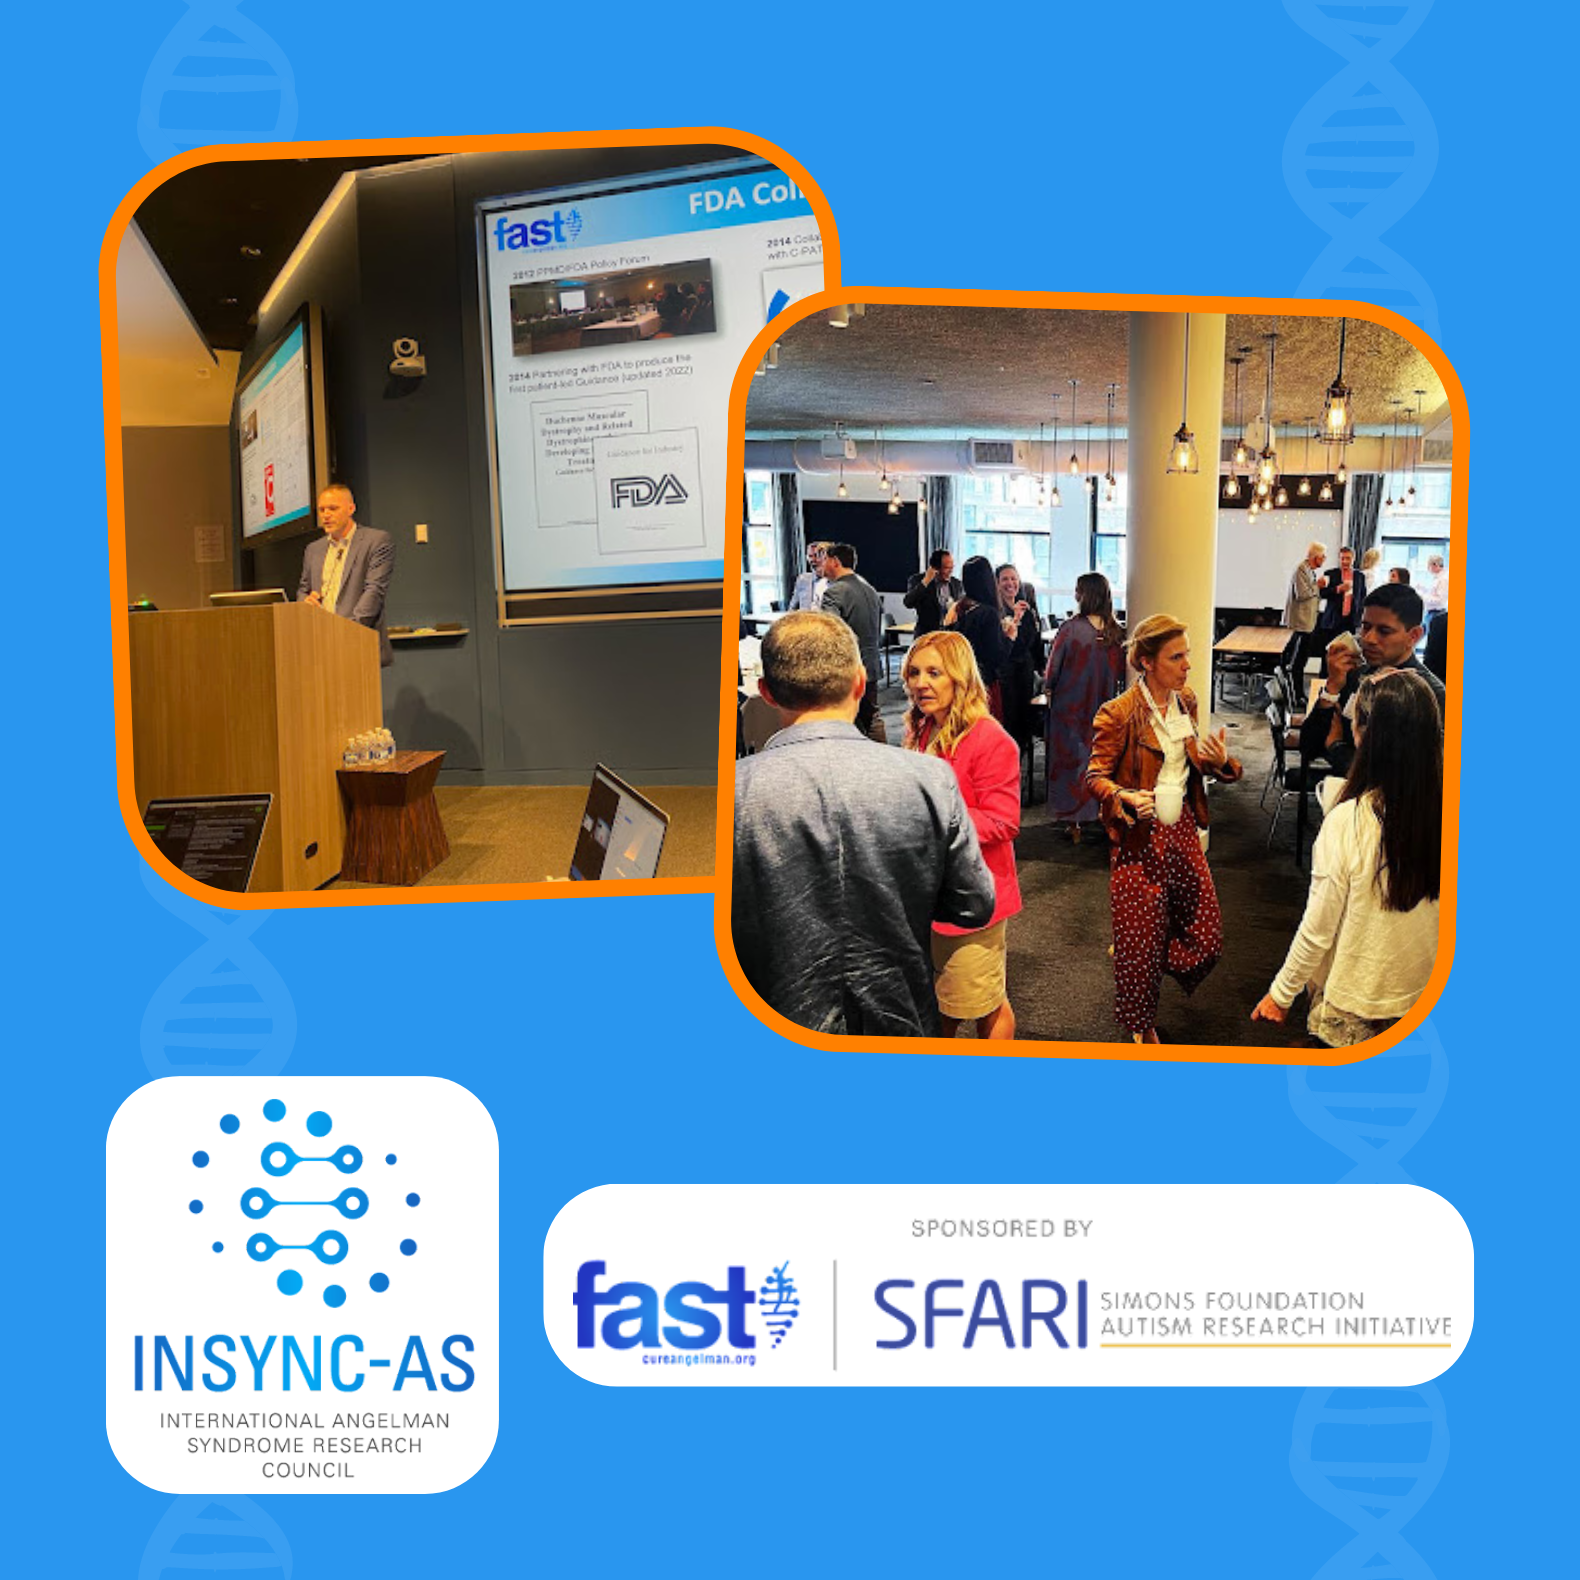 Photos from the INSYNC-AS meeting - a speaker, and people connecting - with the INSYNC, FAST, and SFARI logos